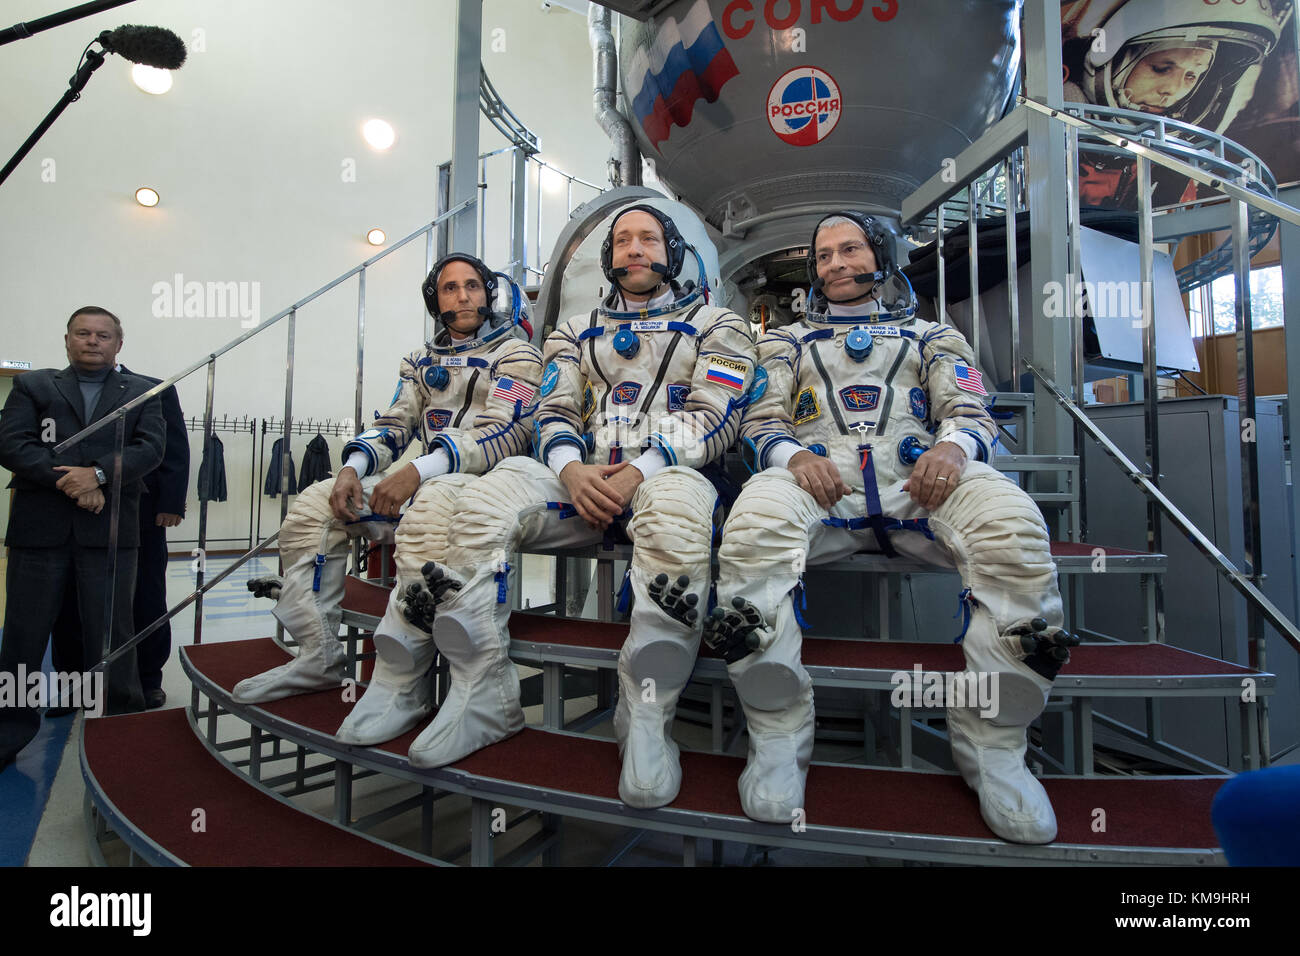 NASA International Space Station (ISS) Expedition 53 prime crew members (L-R) American astronaut Joe Acaba, Russian cosmonaut Alexander Misurkin of Roscosmos, and American astronaut Mark Vande Hei prepare for their Soyuz qualification exams outside the Soyuz simulator prior to the Soyuz MS-06 spacecraft launch at the Gagarin Cosmonaut Training Center August 31, 2017 in Star City, Russia.   (photo by Bill Ingalls  via Planetpix) Stock Photo